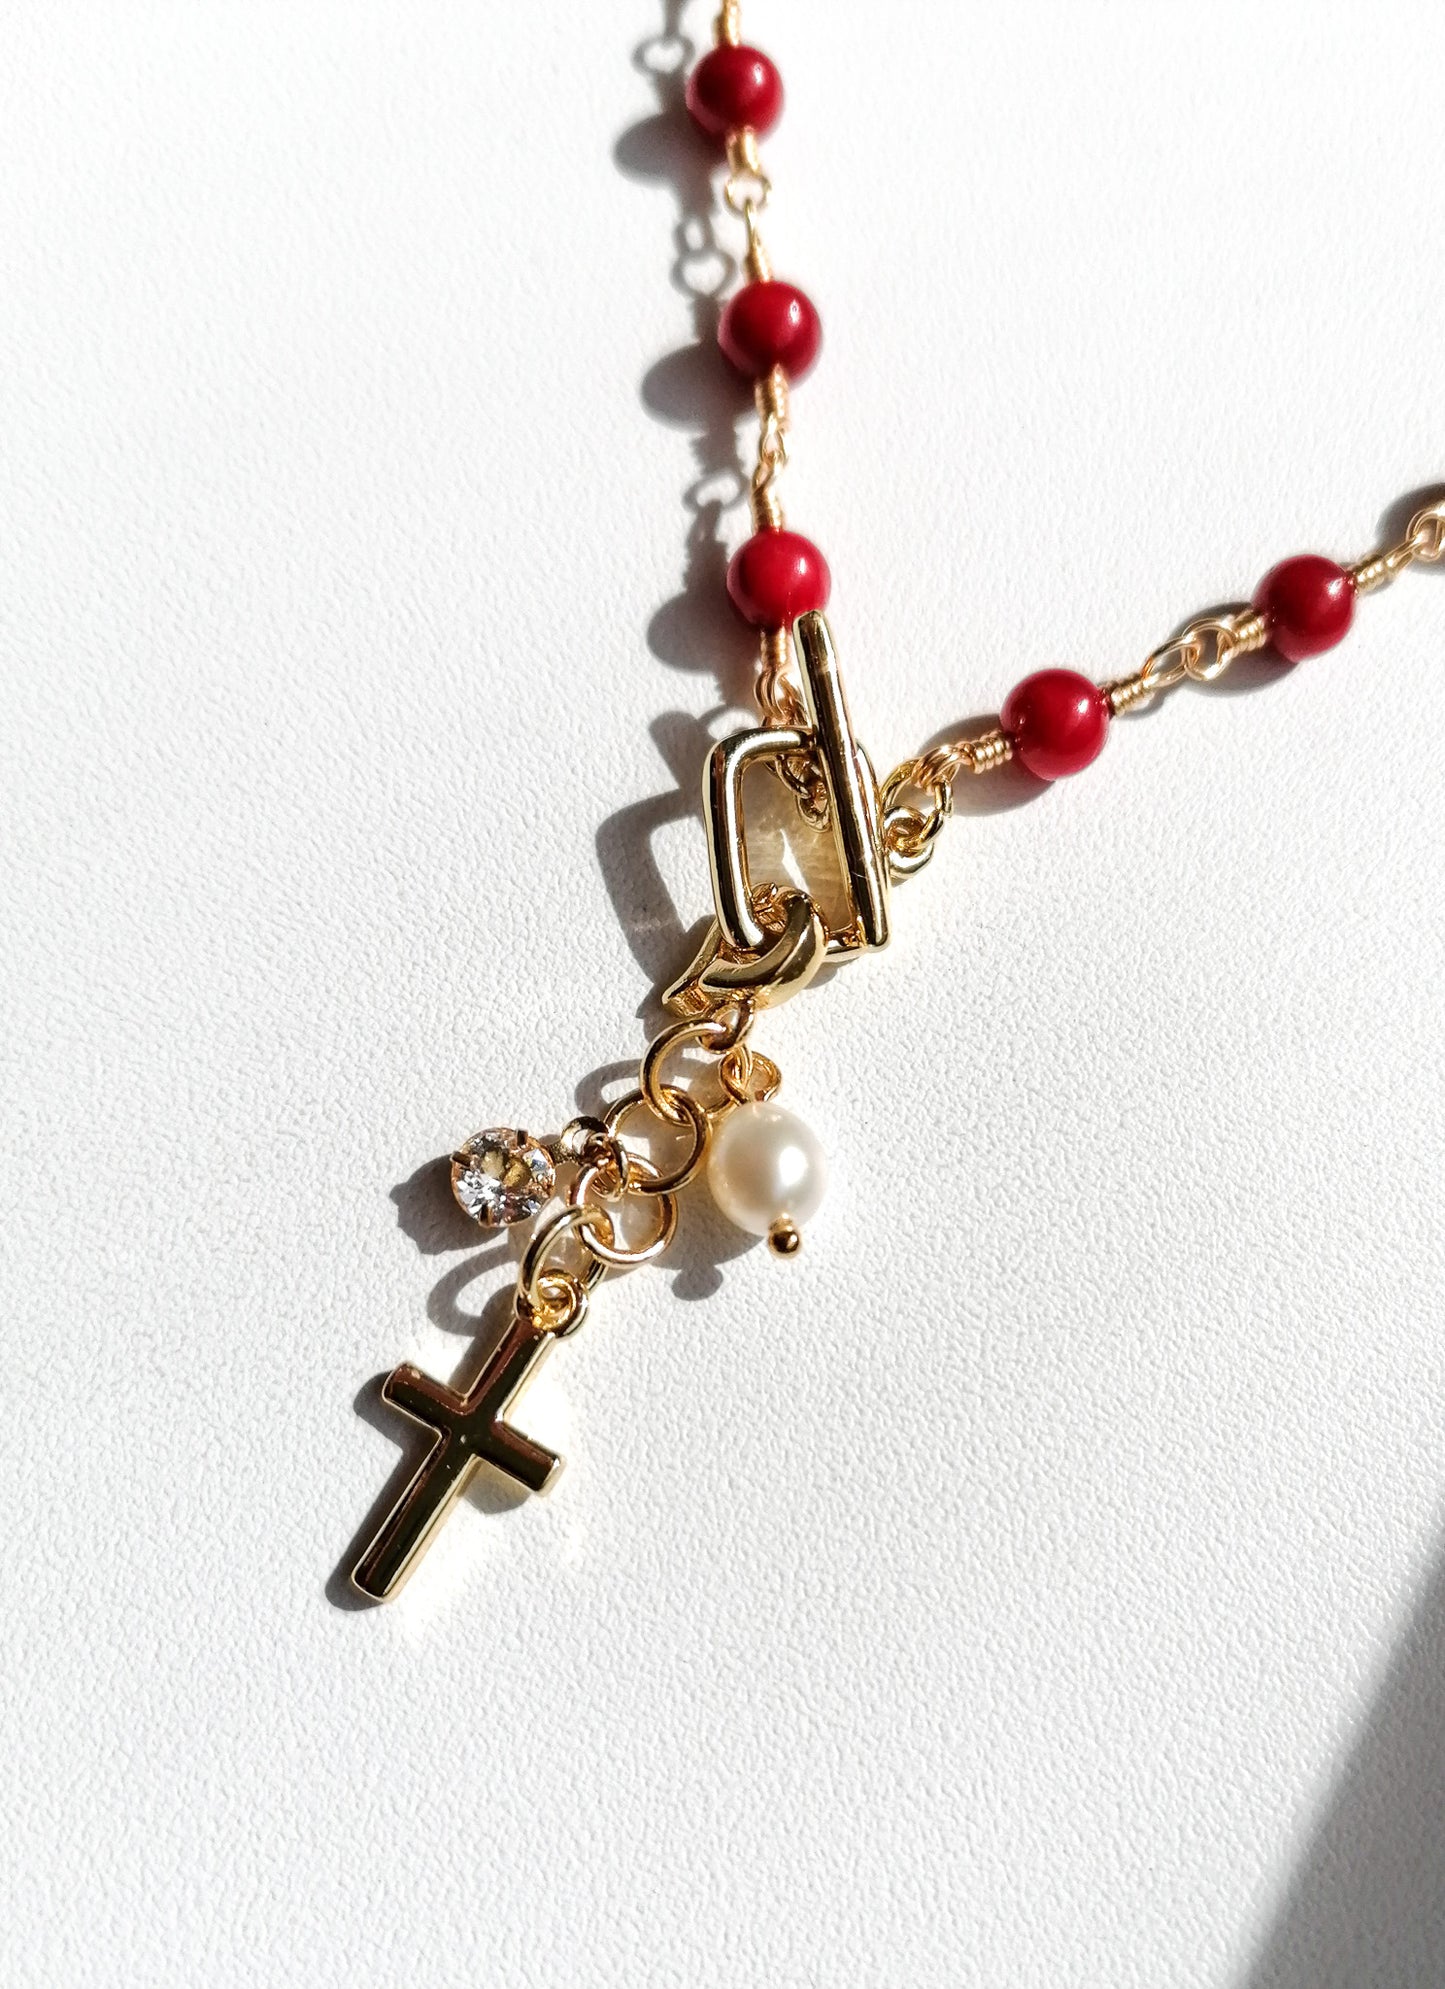 Coral rosary necklace